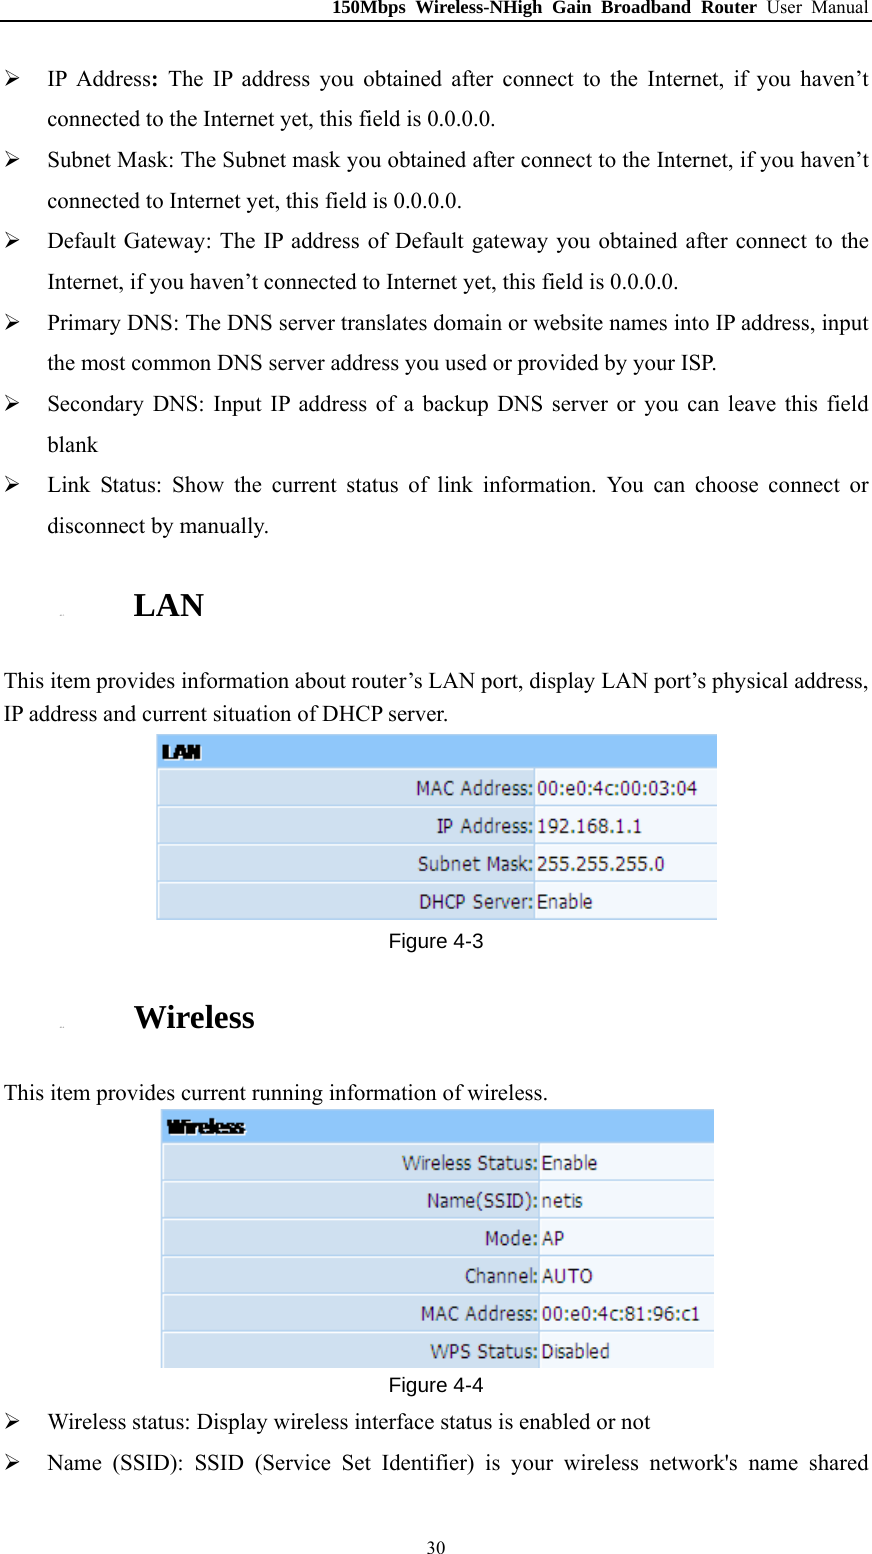 150Mbps Wireless-NHigh Gain Broadband Router User Manual  IP Address:  The IP address you obtained after connect to the Internet, if you haven’t connected to the Internet yet, this field is 0.0.0.0.  Subnet Mask: The Subnet mask you obtained after connect to the Internet, if you haven’t connected to Internet yet, this field is 0.0.0.0.  Default Gateway: The IP address of Default gateway you obtained after connect to the Internet, if you haven’t connected to Internet yet, this field is 0.0.0.0.  Primary DNS: The DNS server translates domain or website names into IP address, input the most common DNS server address you used or provided by your ISP.  Secondary DNS: Input IP address of a backup DNS server or you can leave this field blank  Link Status: Show the current status of link information. You can choose connect or disconnect by manually. 4.1.3. LAN This item provides information about router’s LAN port, display LAN port’s physical address, IP address and current situation of DHCP server.  Figure 4-3 4.1.4. Wireless This item provides current running information of wireless.  Figure 4-4  Wireless status: Display wireless interface status is enabled or not  Name (SSID): SSID (Service Set Identifier) is your wireless network&apos;s name shared  30